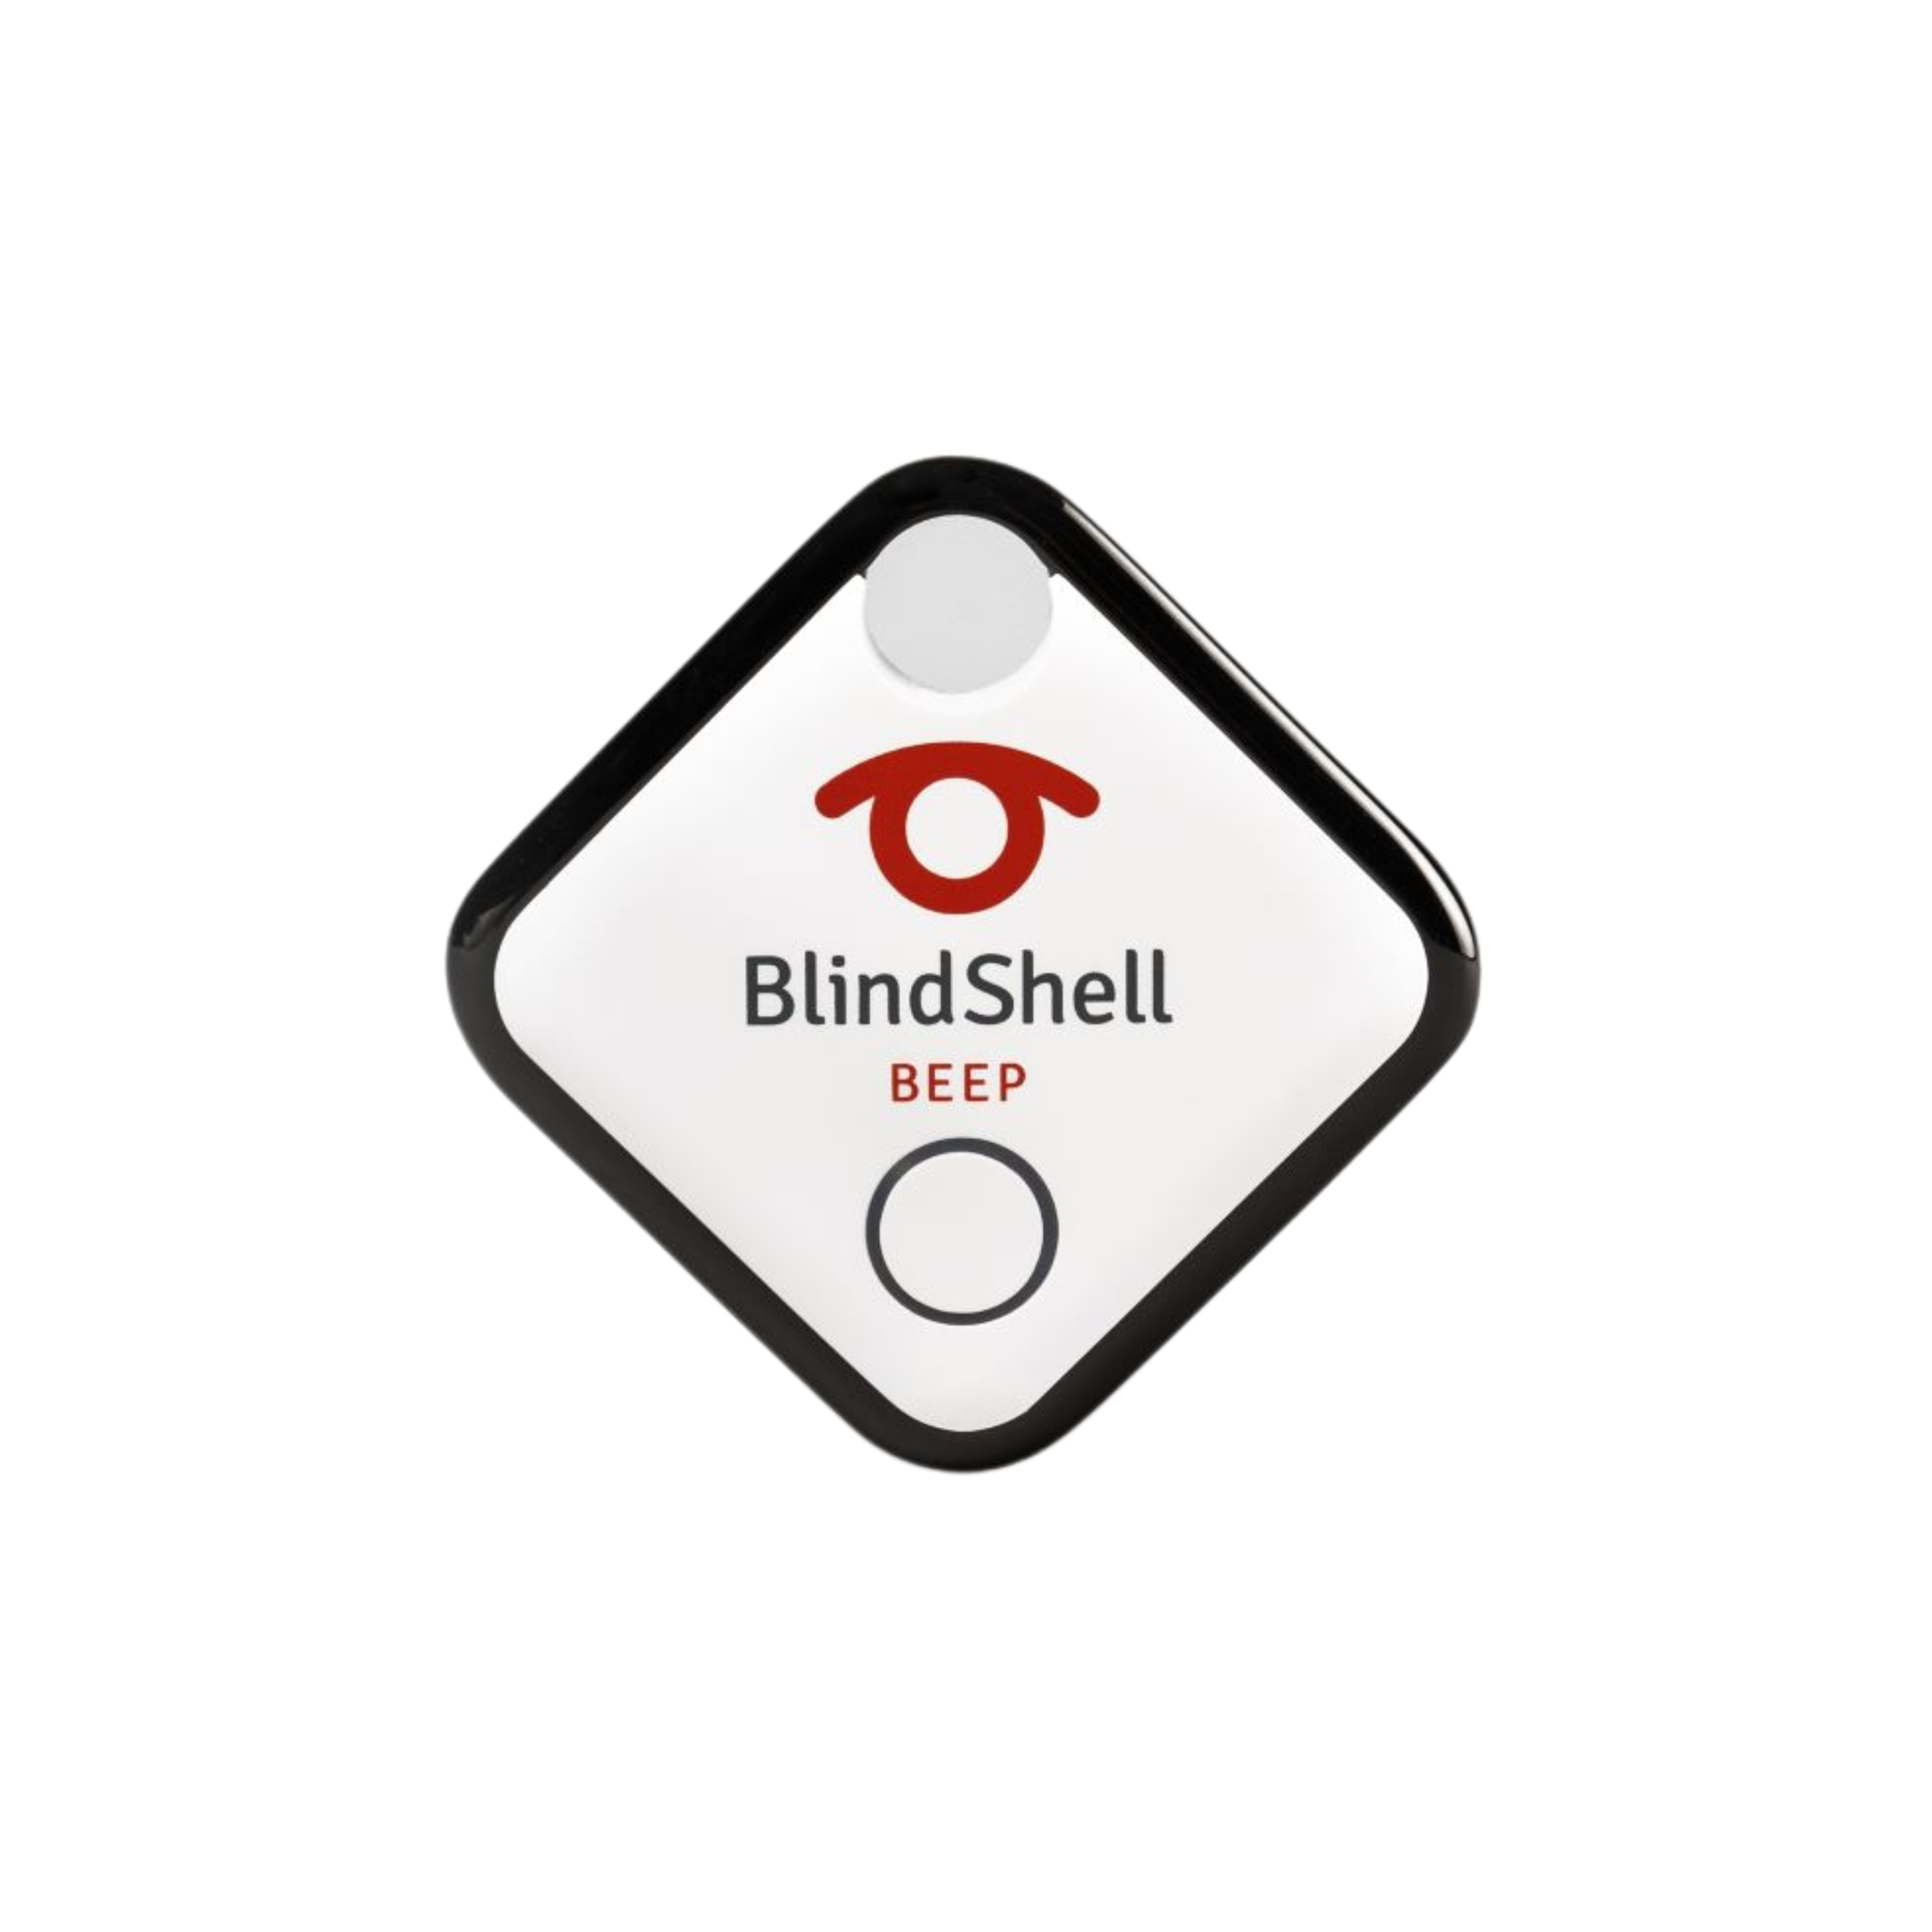 Image of the BlindShell Beep tag